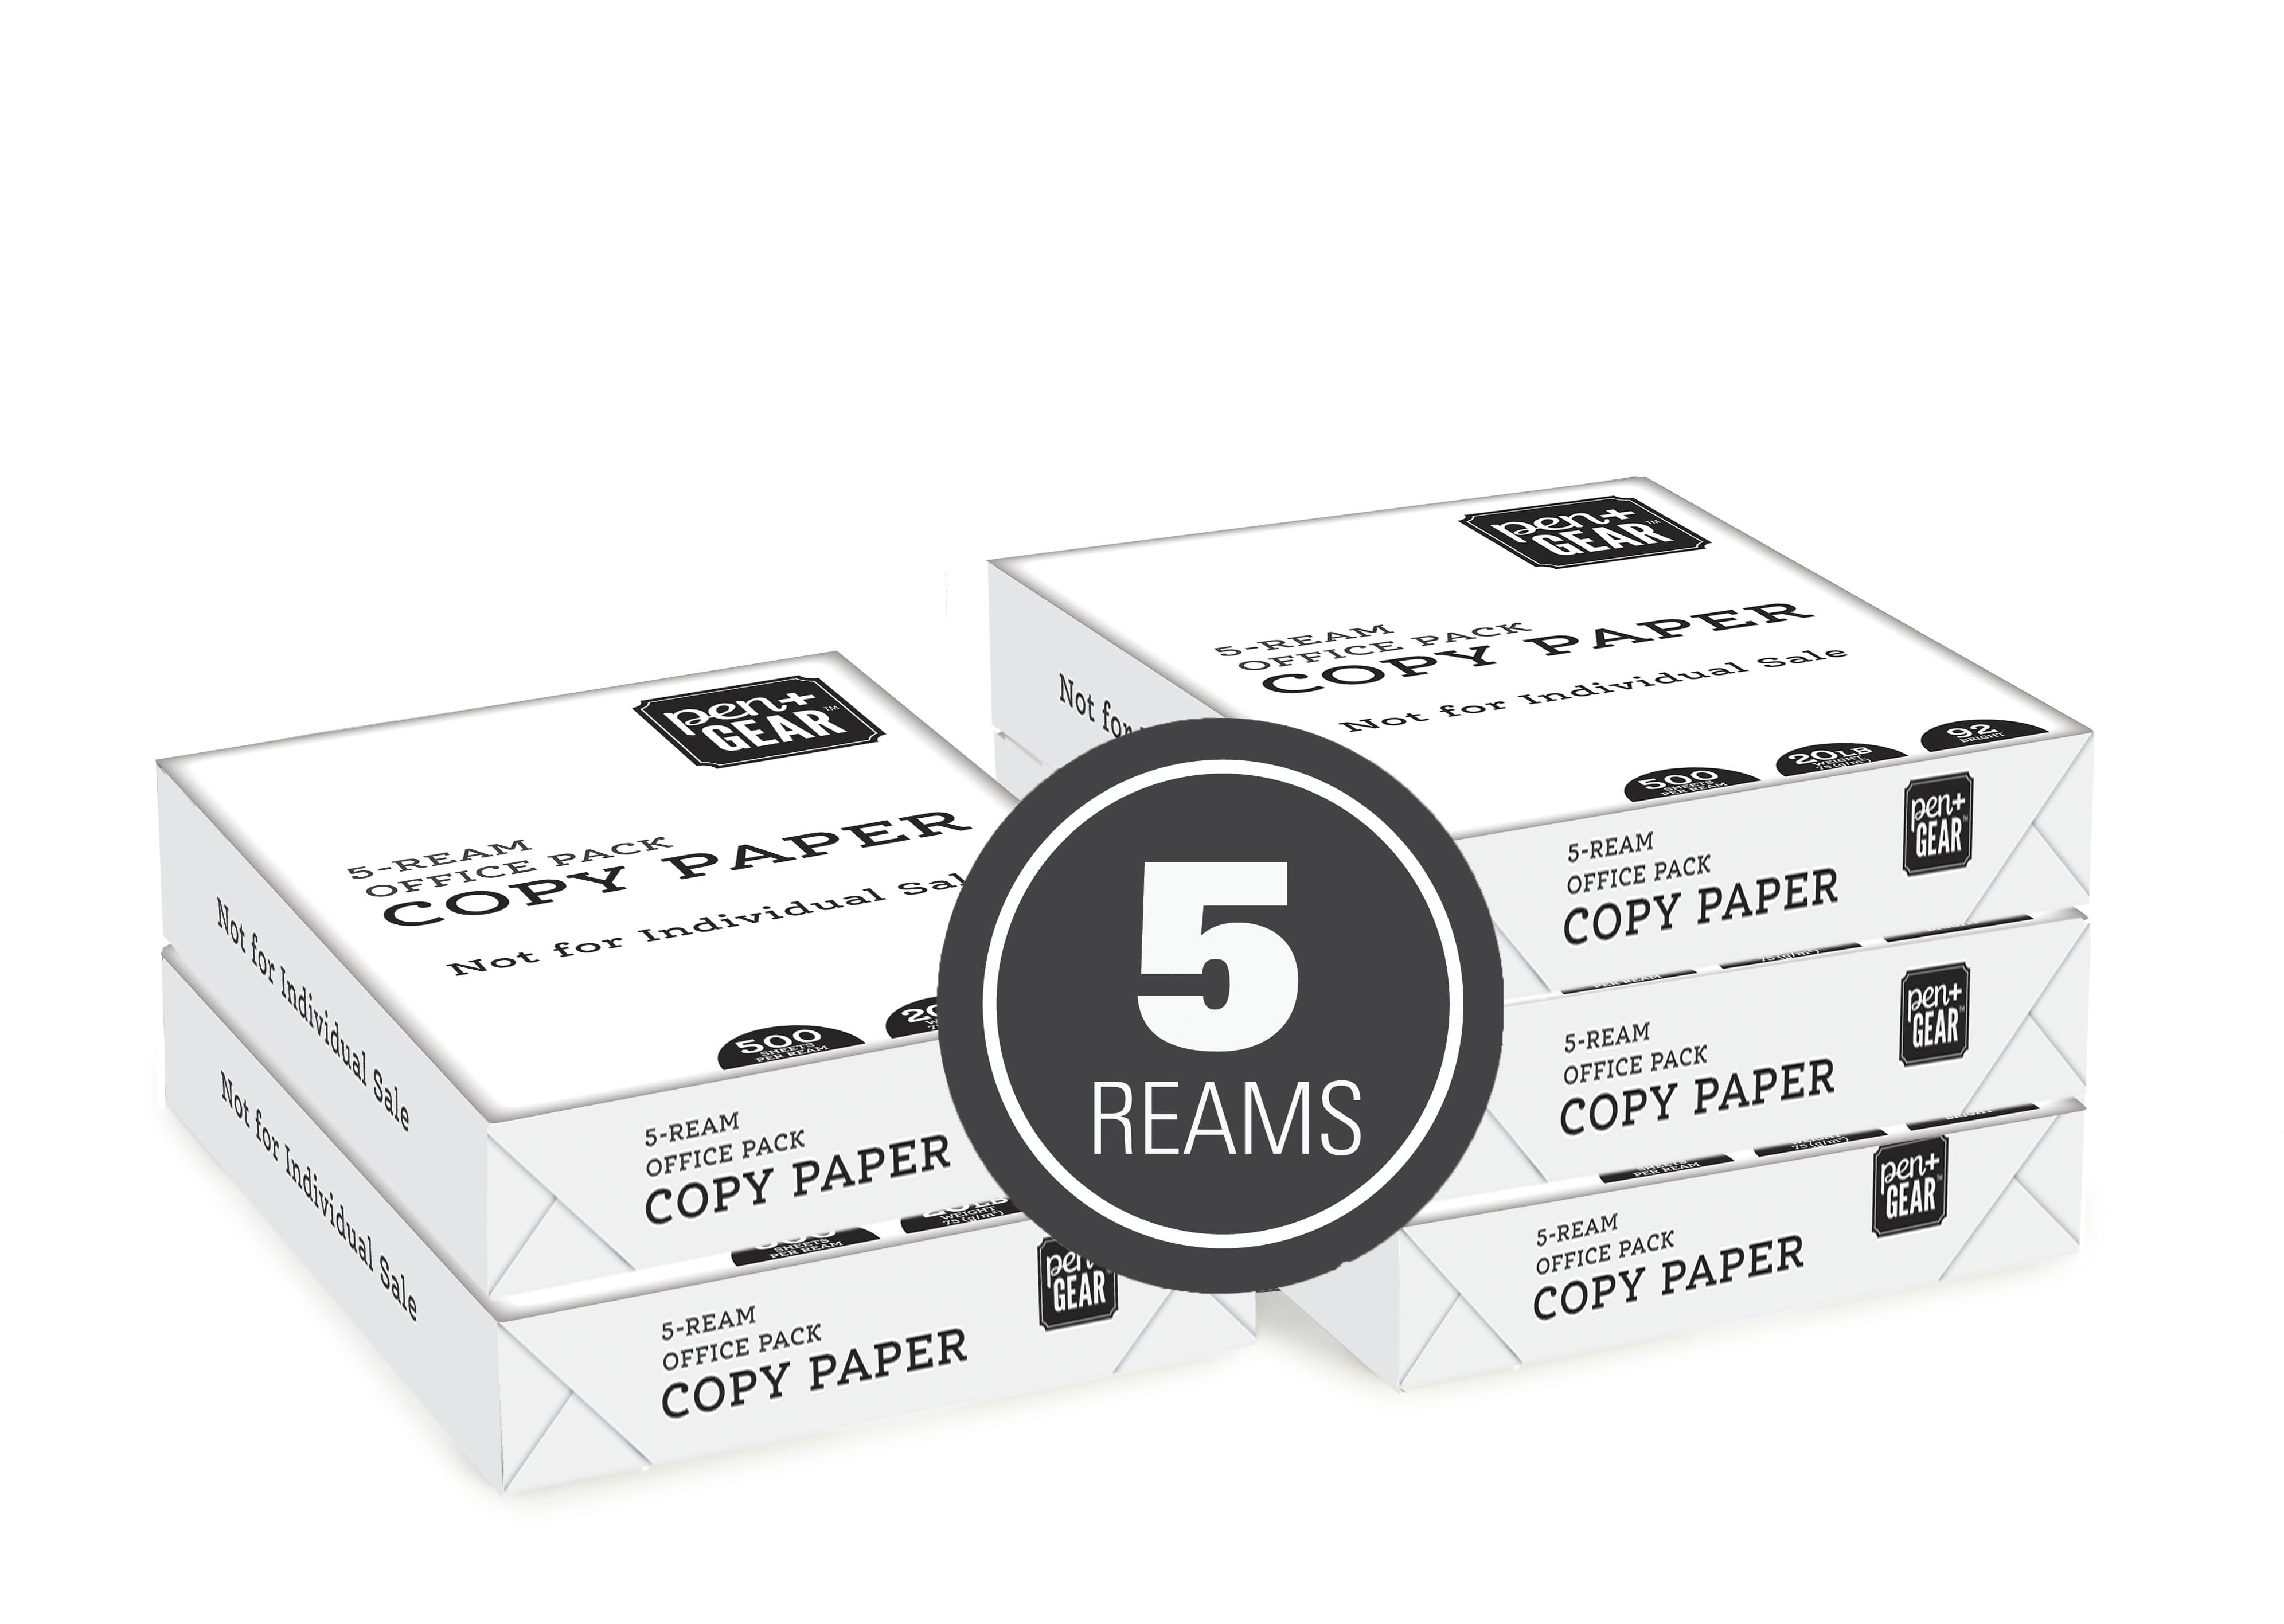 SKILCRAFT Xerographic Copier Paper Letter Size 8 12 x 11 2500 Total Sheets  92 U.S. Brightness 20 Lb 30percent Recycled White 500 Sheets Per Ream Case  Of 5 Reams - Office Depot